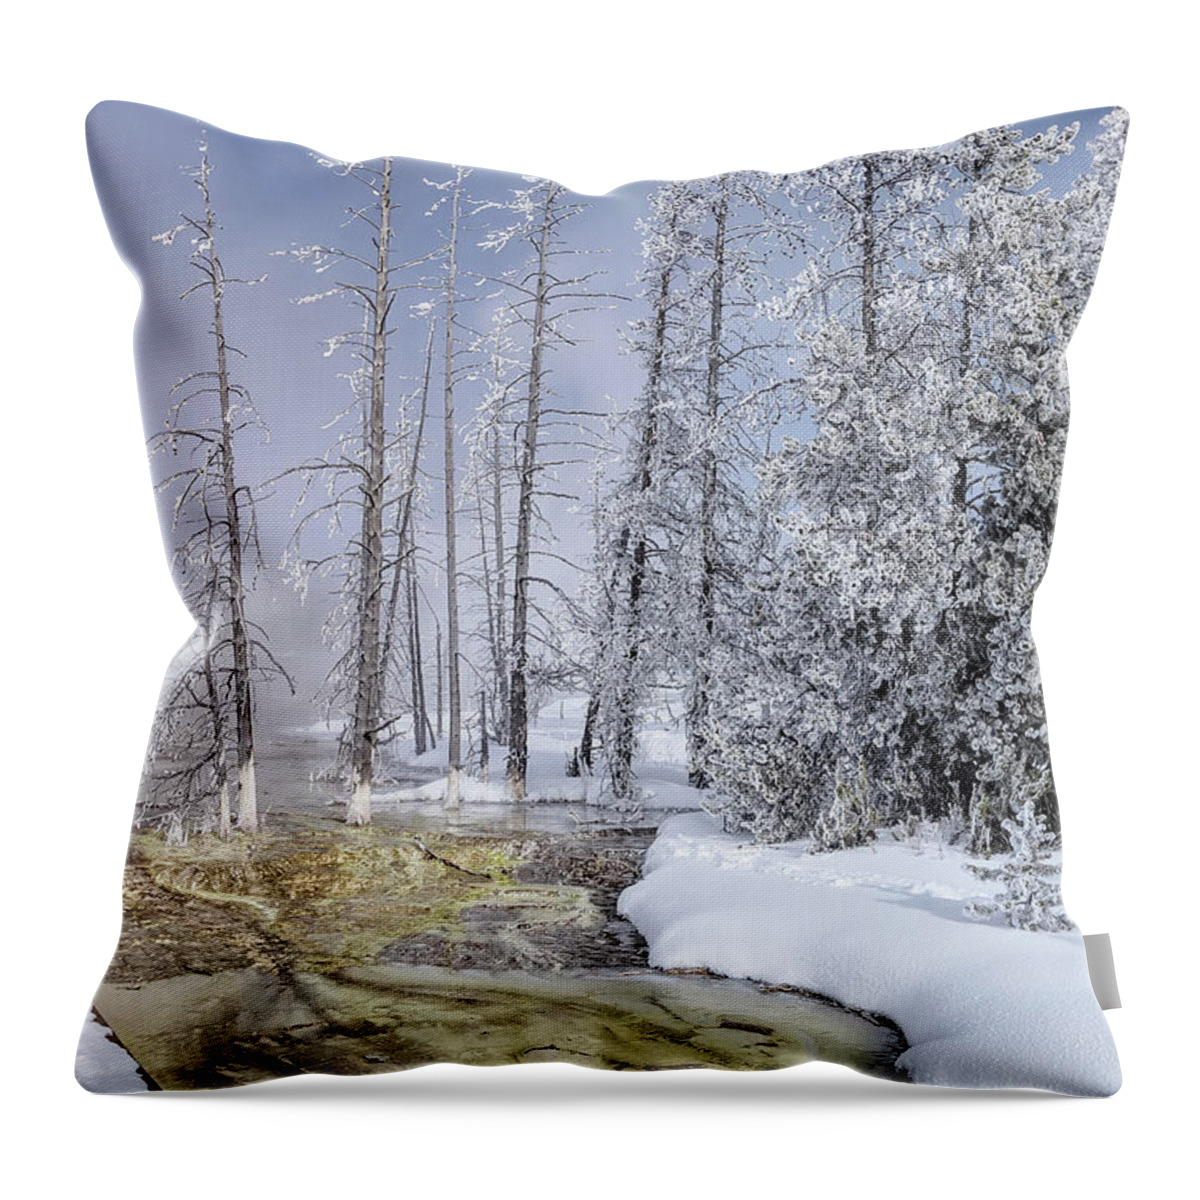 2019 Throw Pillow featuring the photograph River Of Gold - Jo Ann Tomaselli by Jo Ann Tomaselli